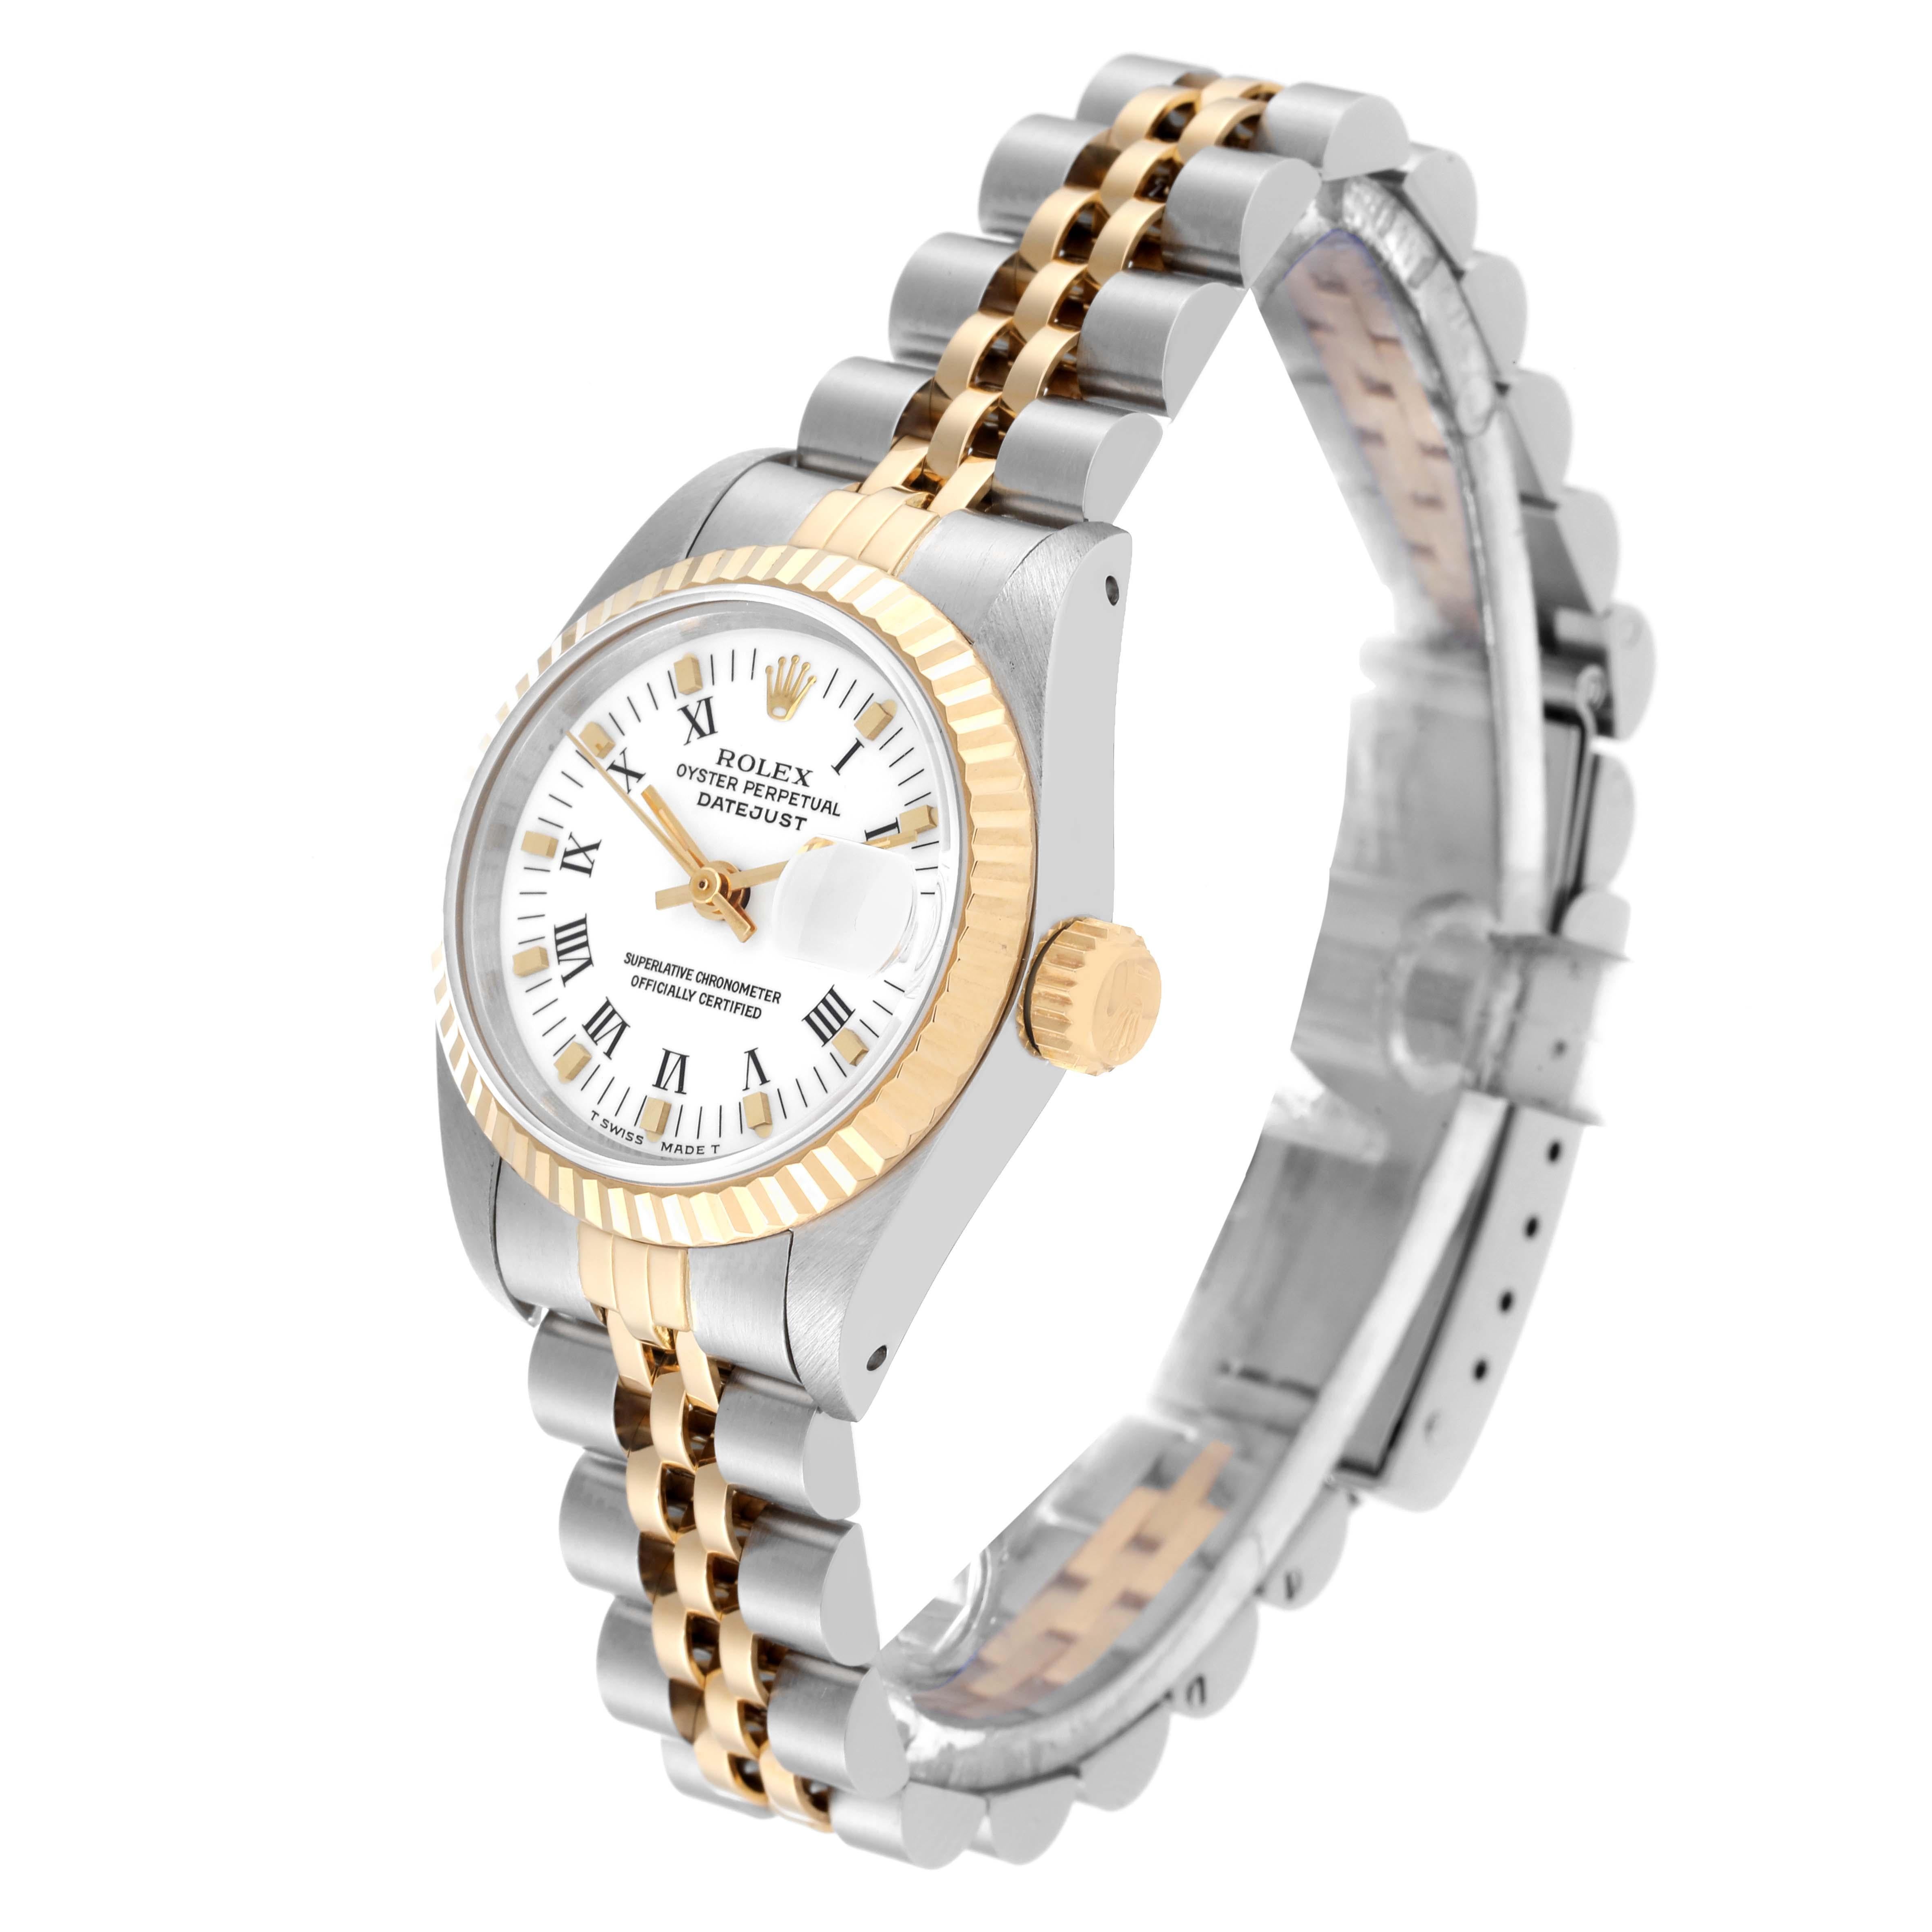 Women's Rolex Datejust Steel Yellow Gold White Dial Ladies Watch 69173 Box Papers